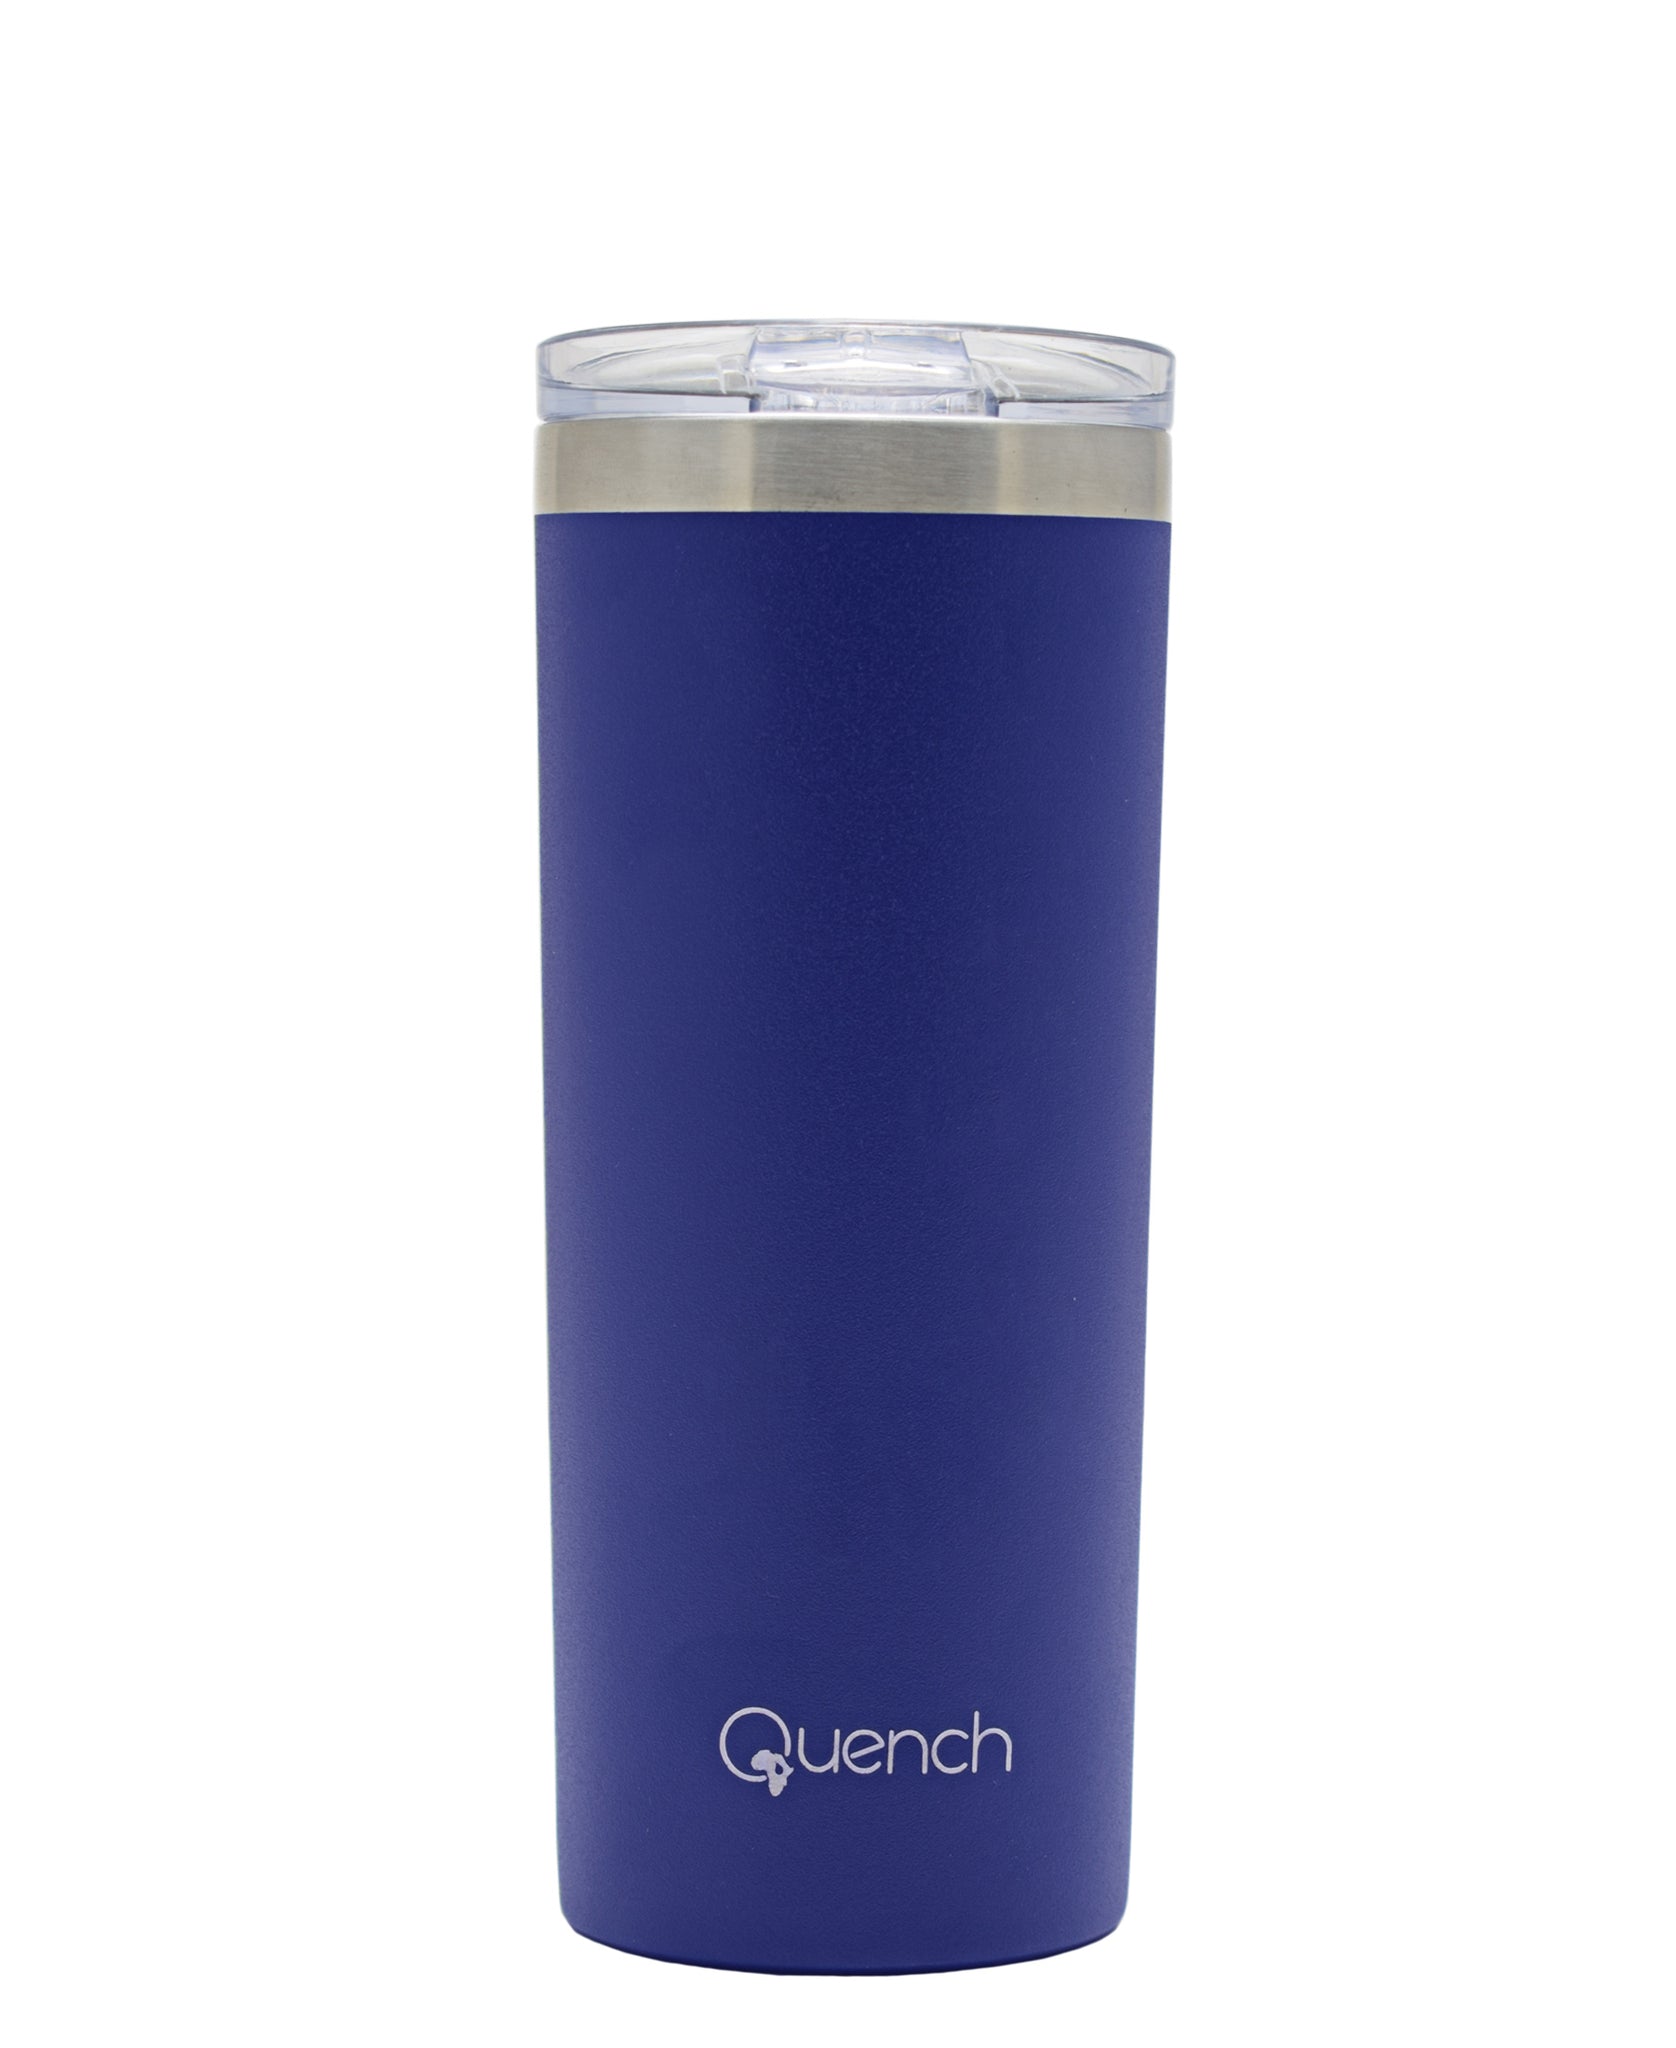 Quench 500ml Stainless Steel Travel Buddy - Blue